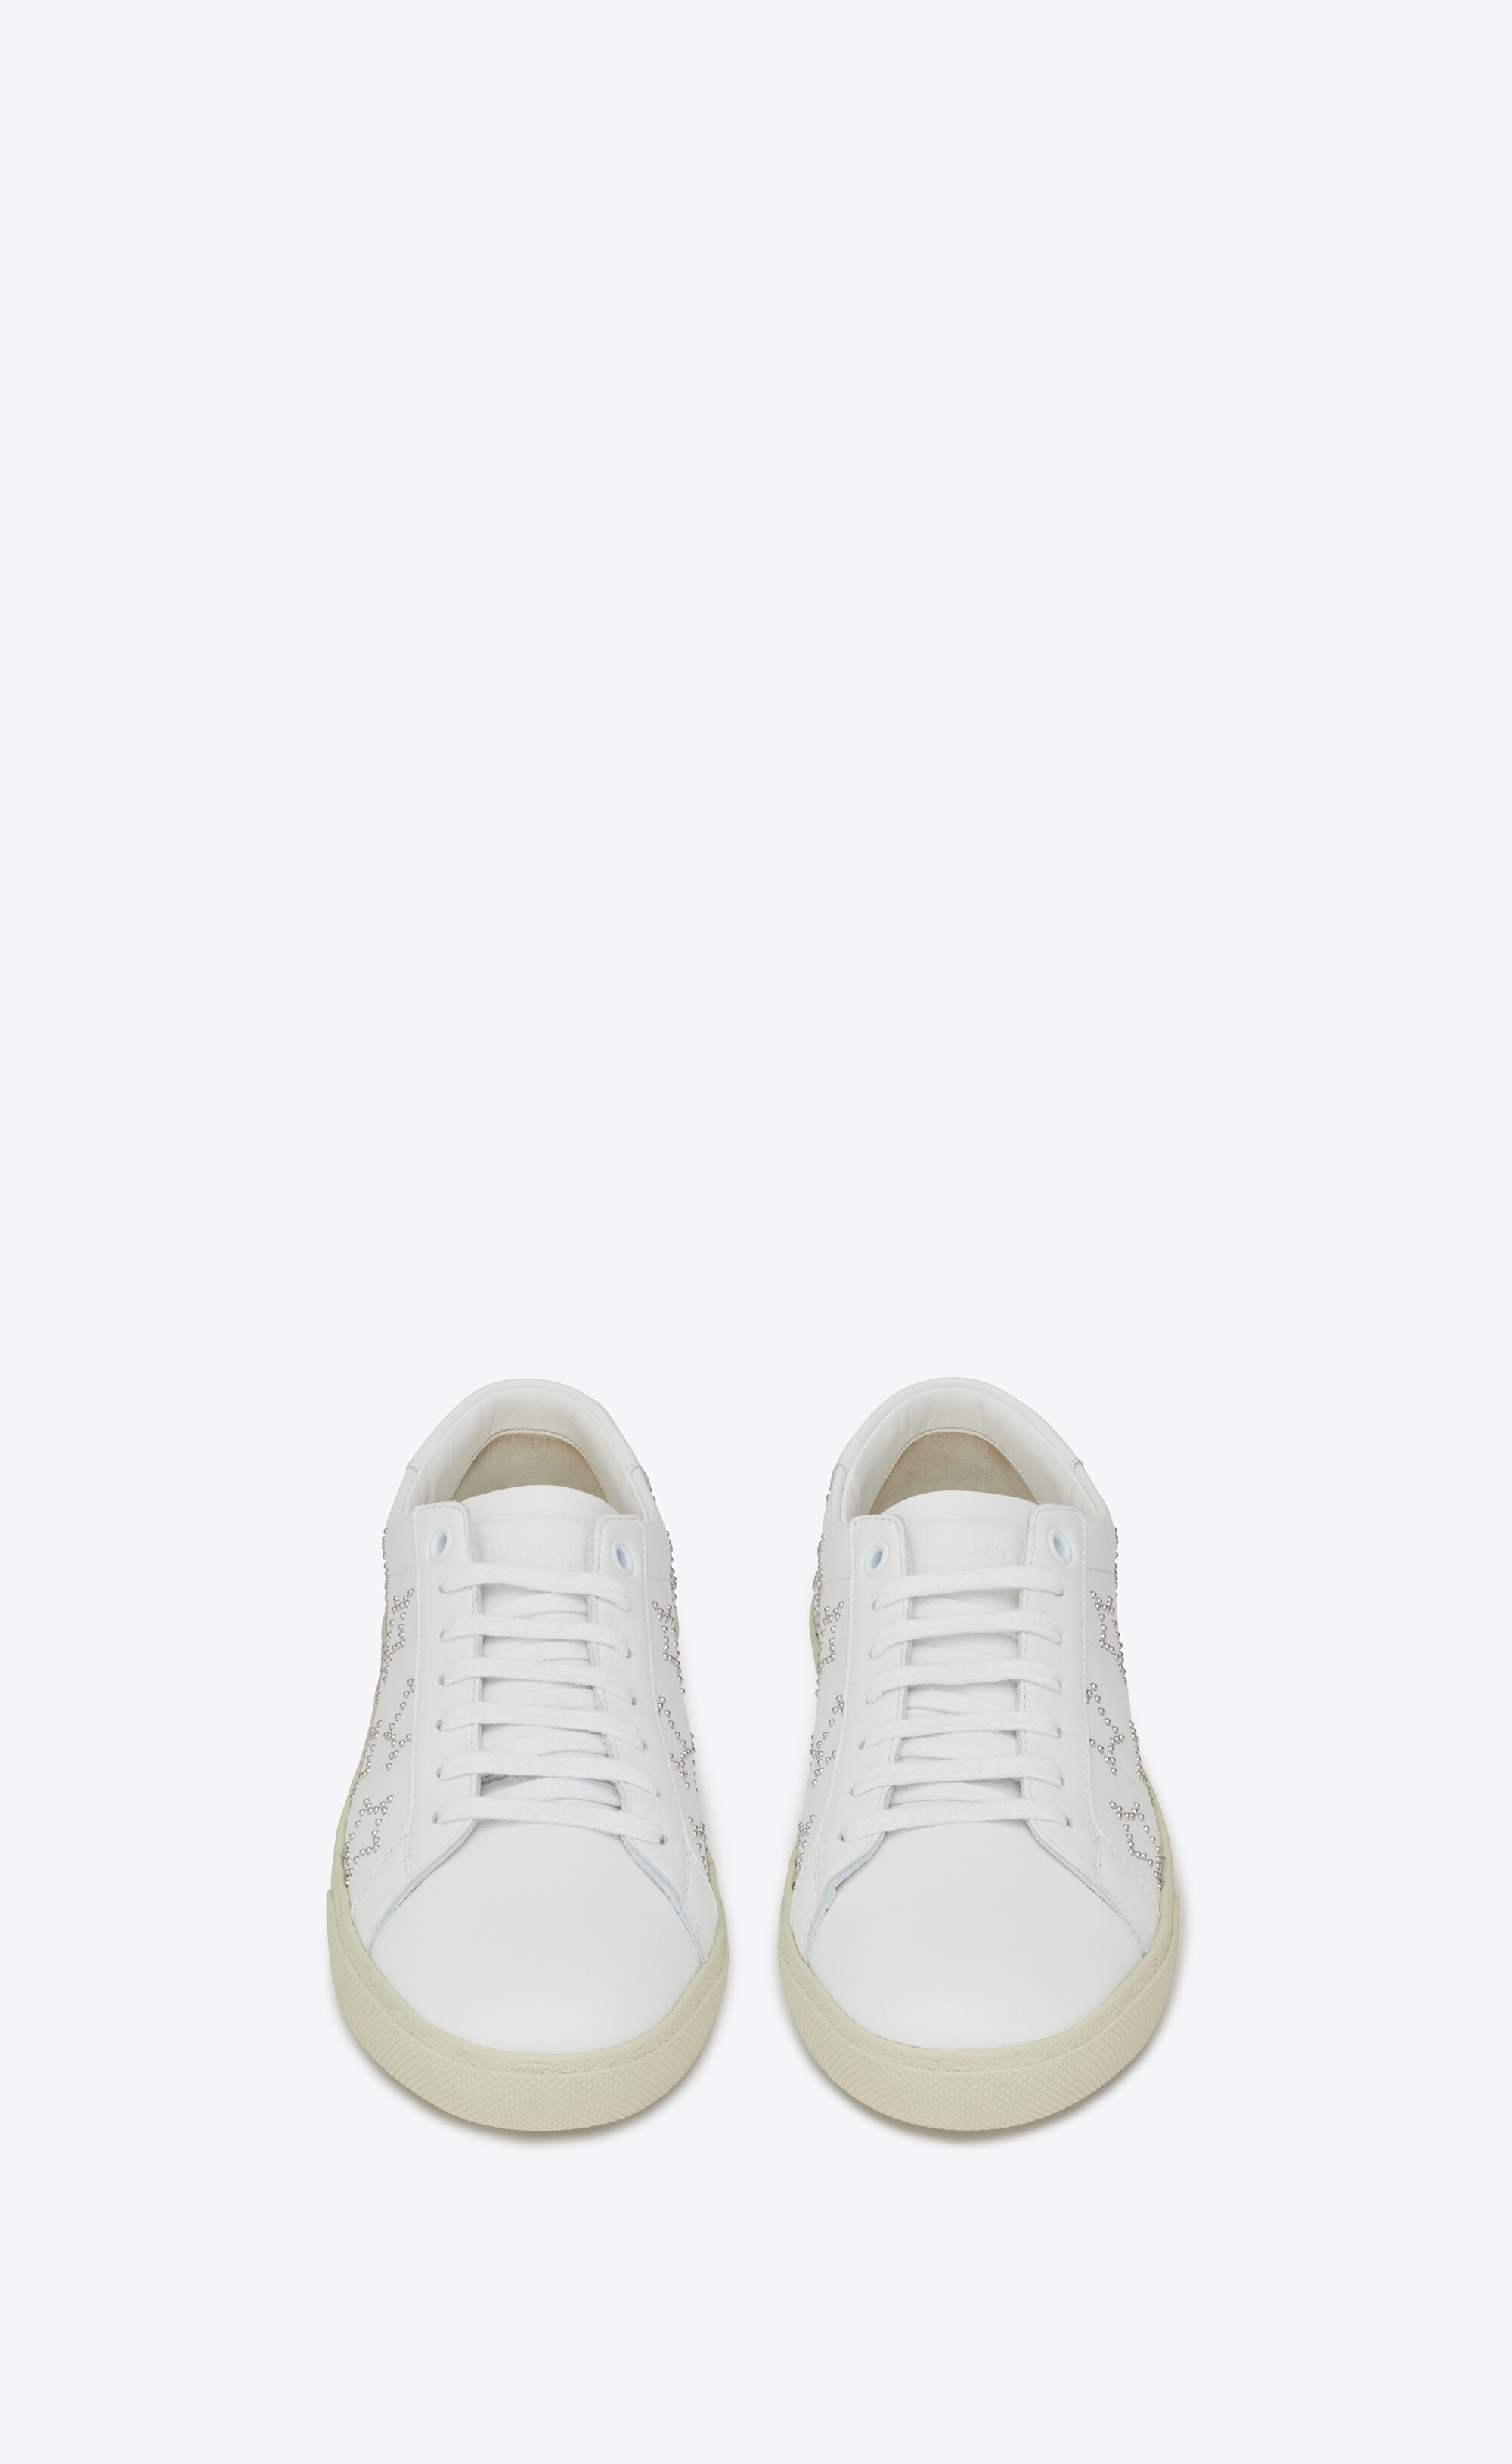 court classic sl/06 california sneakers in smooth leather - 2